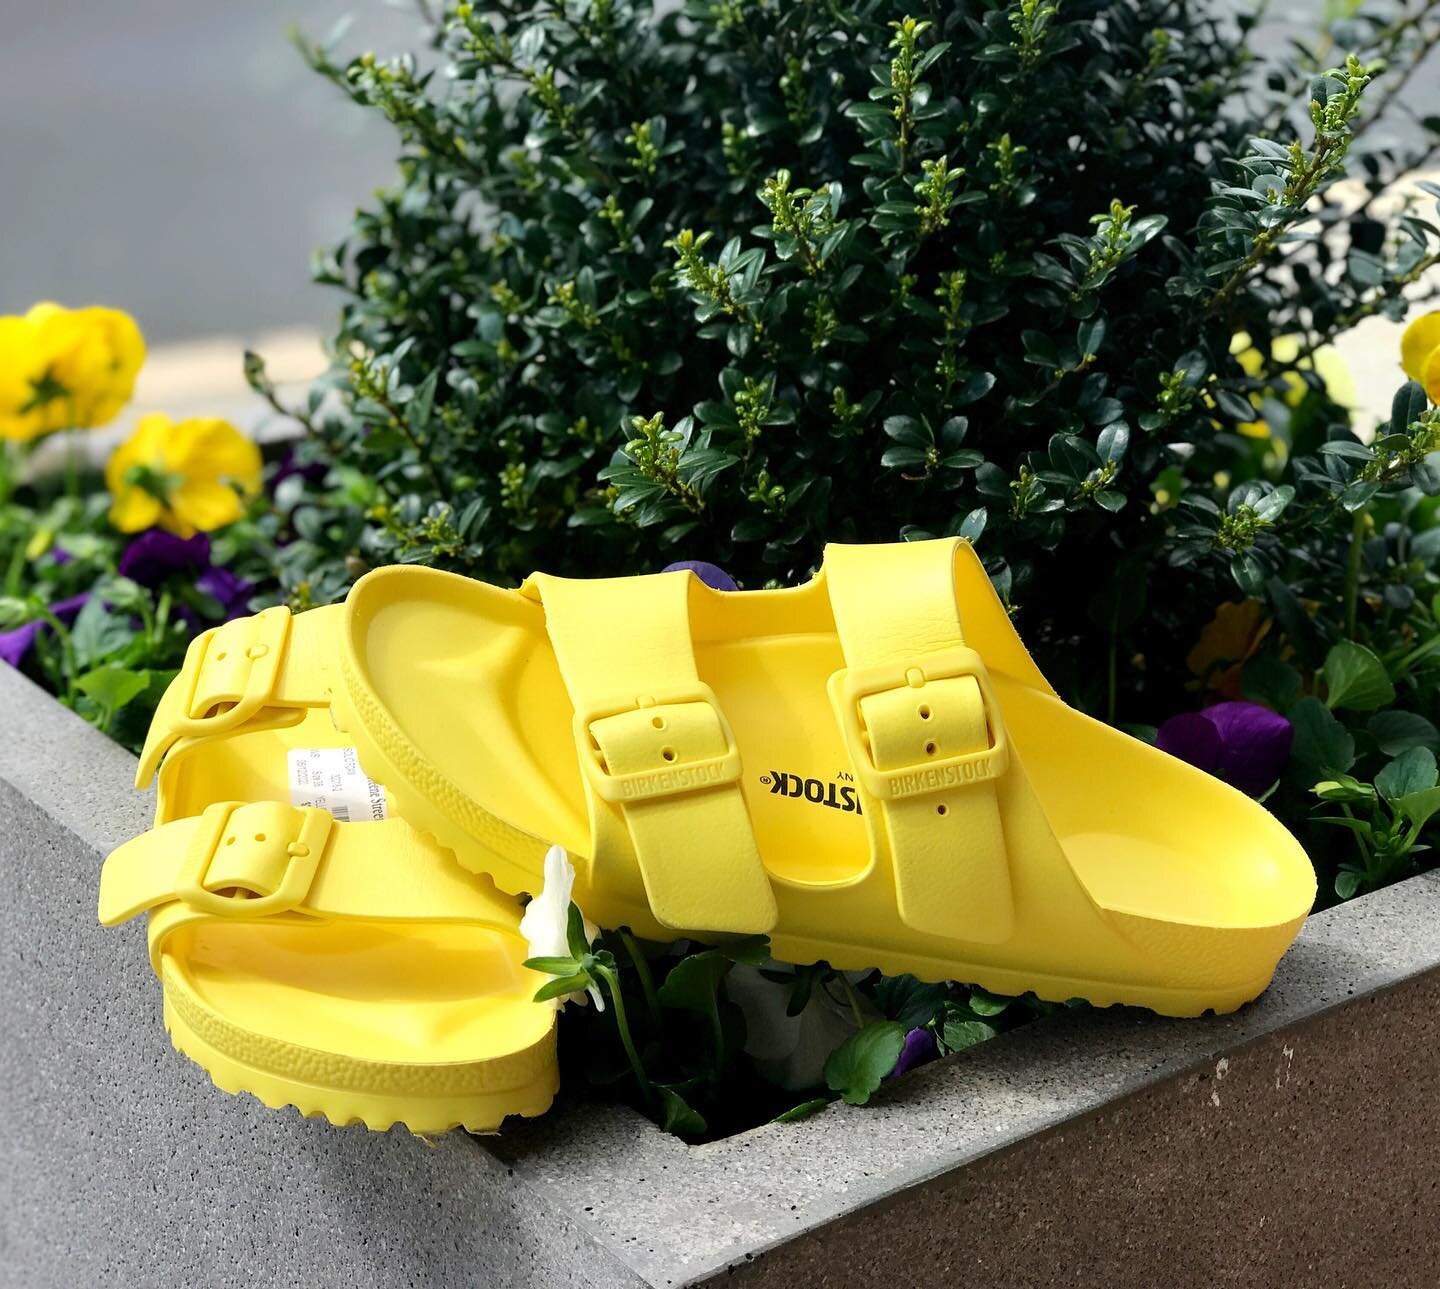 We 💛 Birkenstocks! 🩴 Scoop up this pair of Arizona EVA sandals available at @greenestreetsnyder for $24.95, size 38
⠀⠀⠀⠀⠀⠀⠀⠀⠀
For inquiries call or email us!
📞267-807-1295 
📧snyder@greenestreet.com